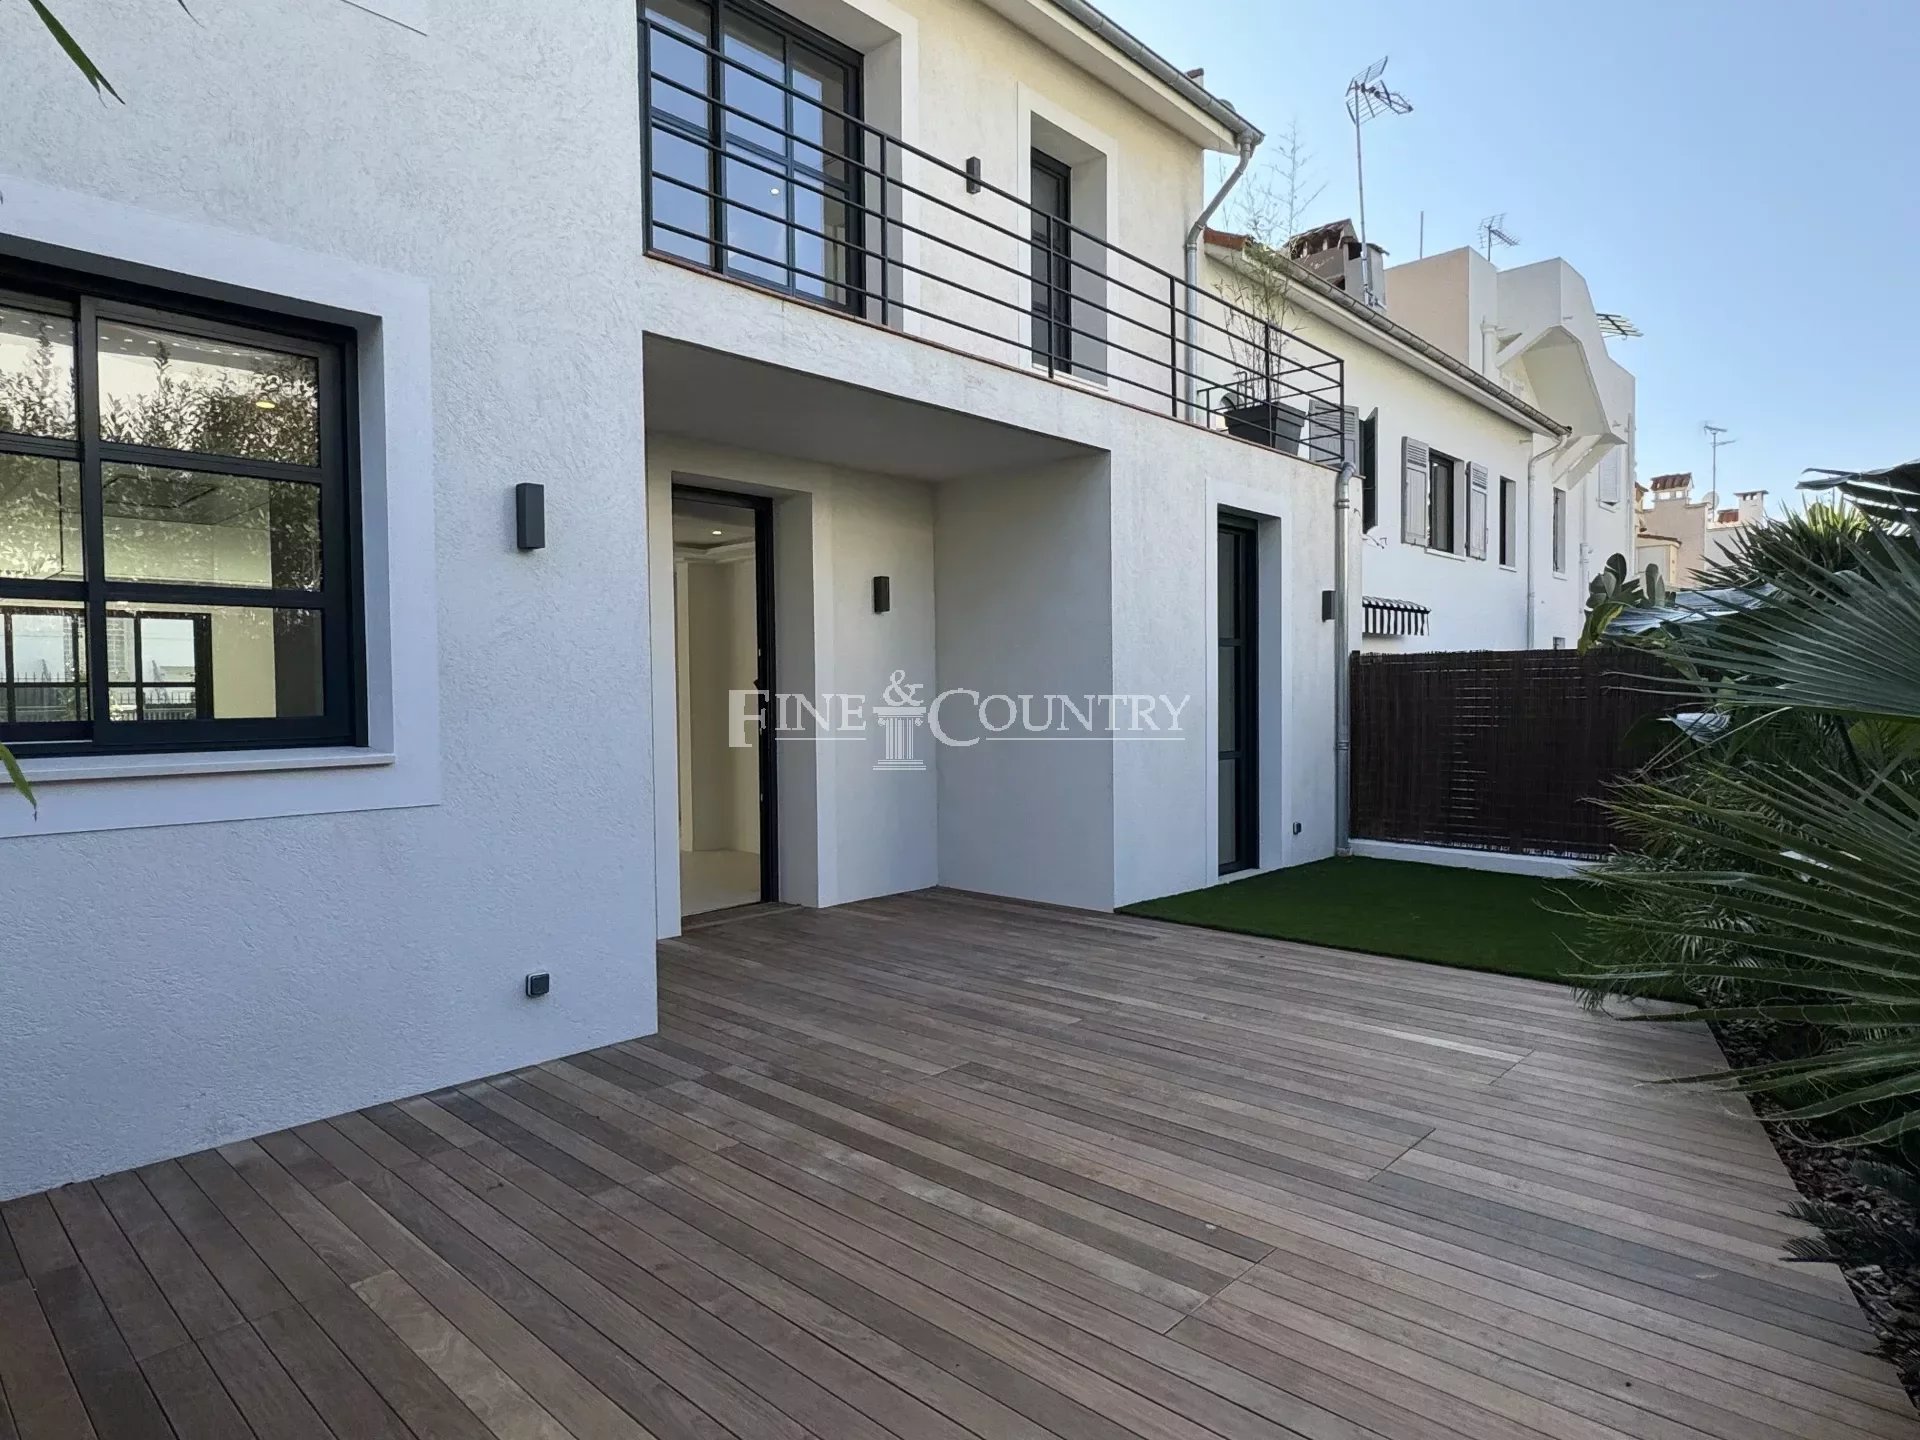 HOUSE FOR SALE IN CANNES BASSE CALIFORNIE, WITH GARDEN